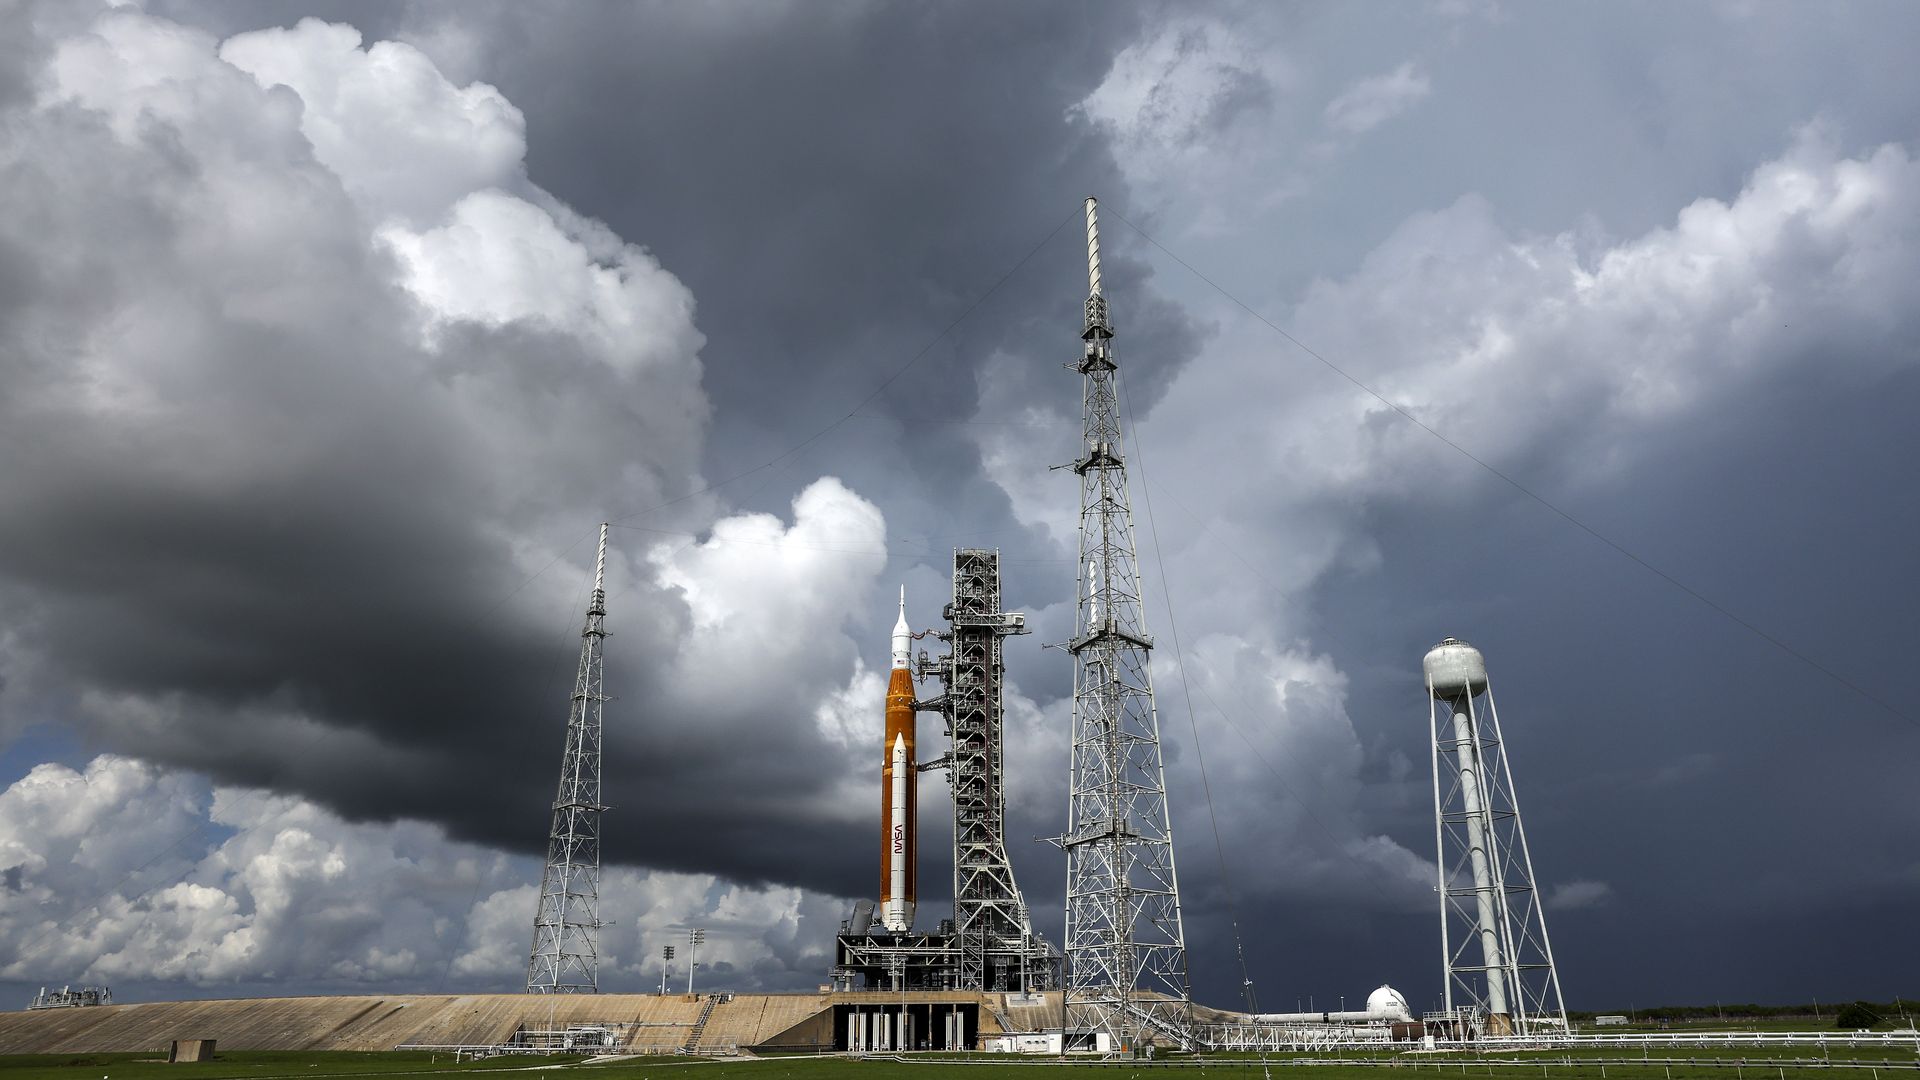 NASA's Artemis I rocket sits on launch pad 39-B at Kennedy Space Center on September 2, 2022 in Cape Canaveral, Florida. 